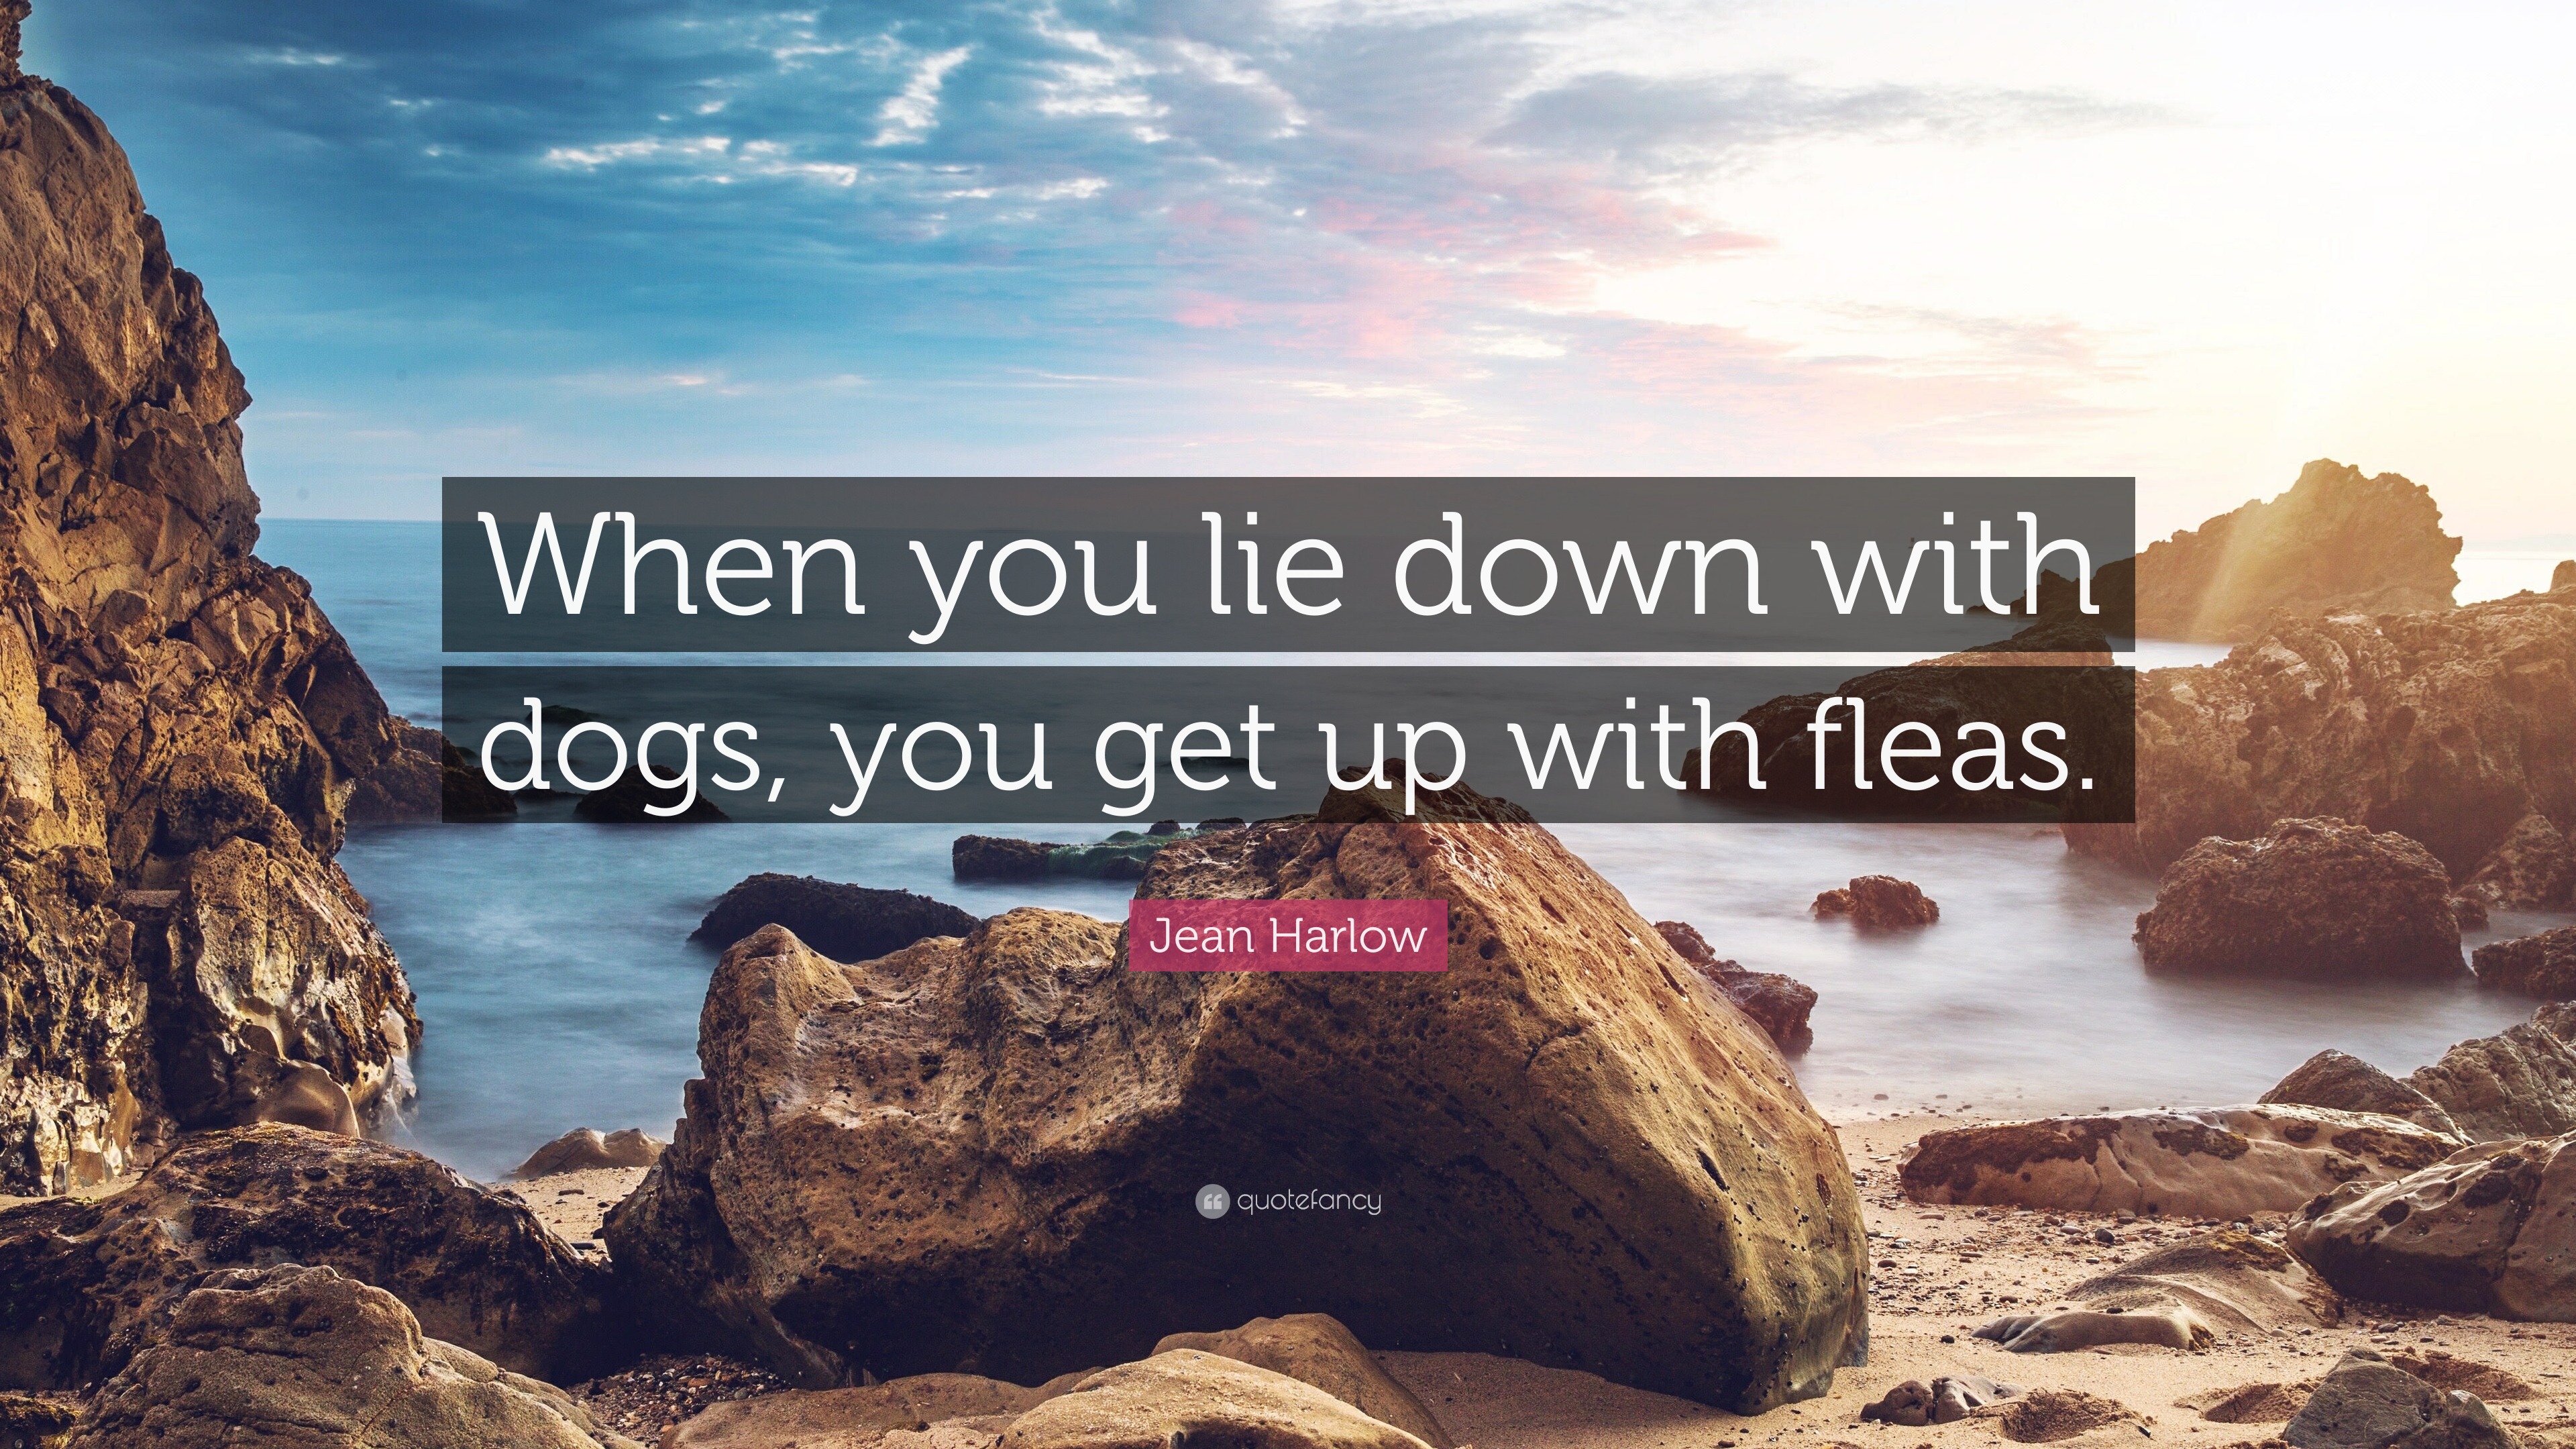 Jean Harlow Quote: “When you lie down with dogs, you get up with fleas.”